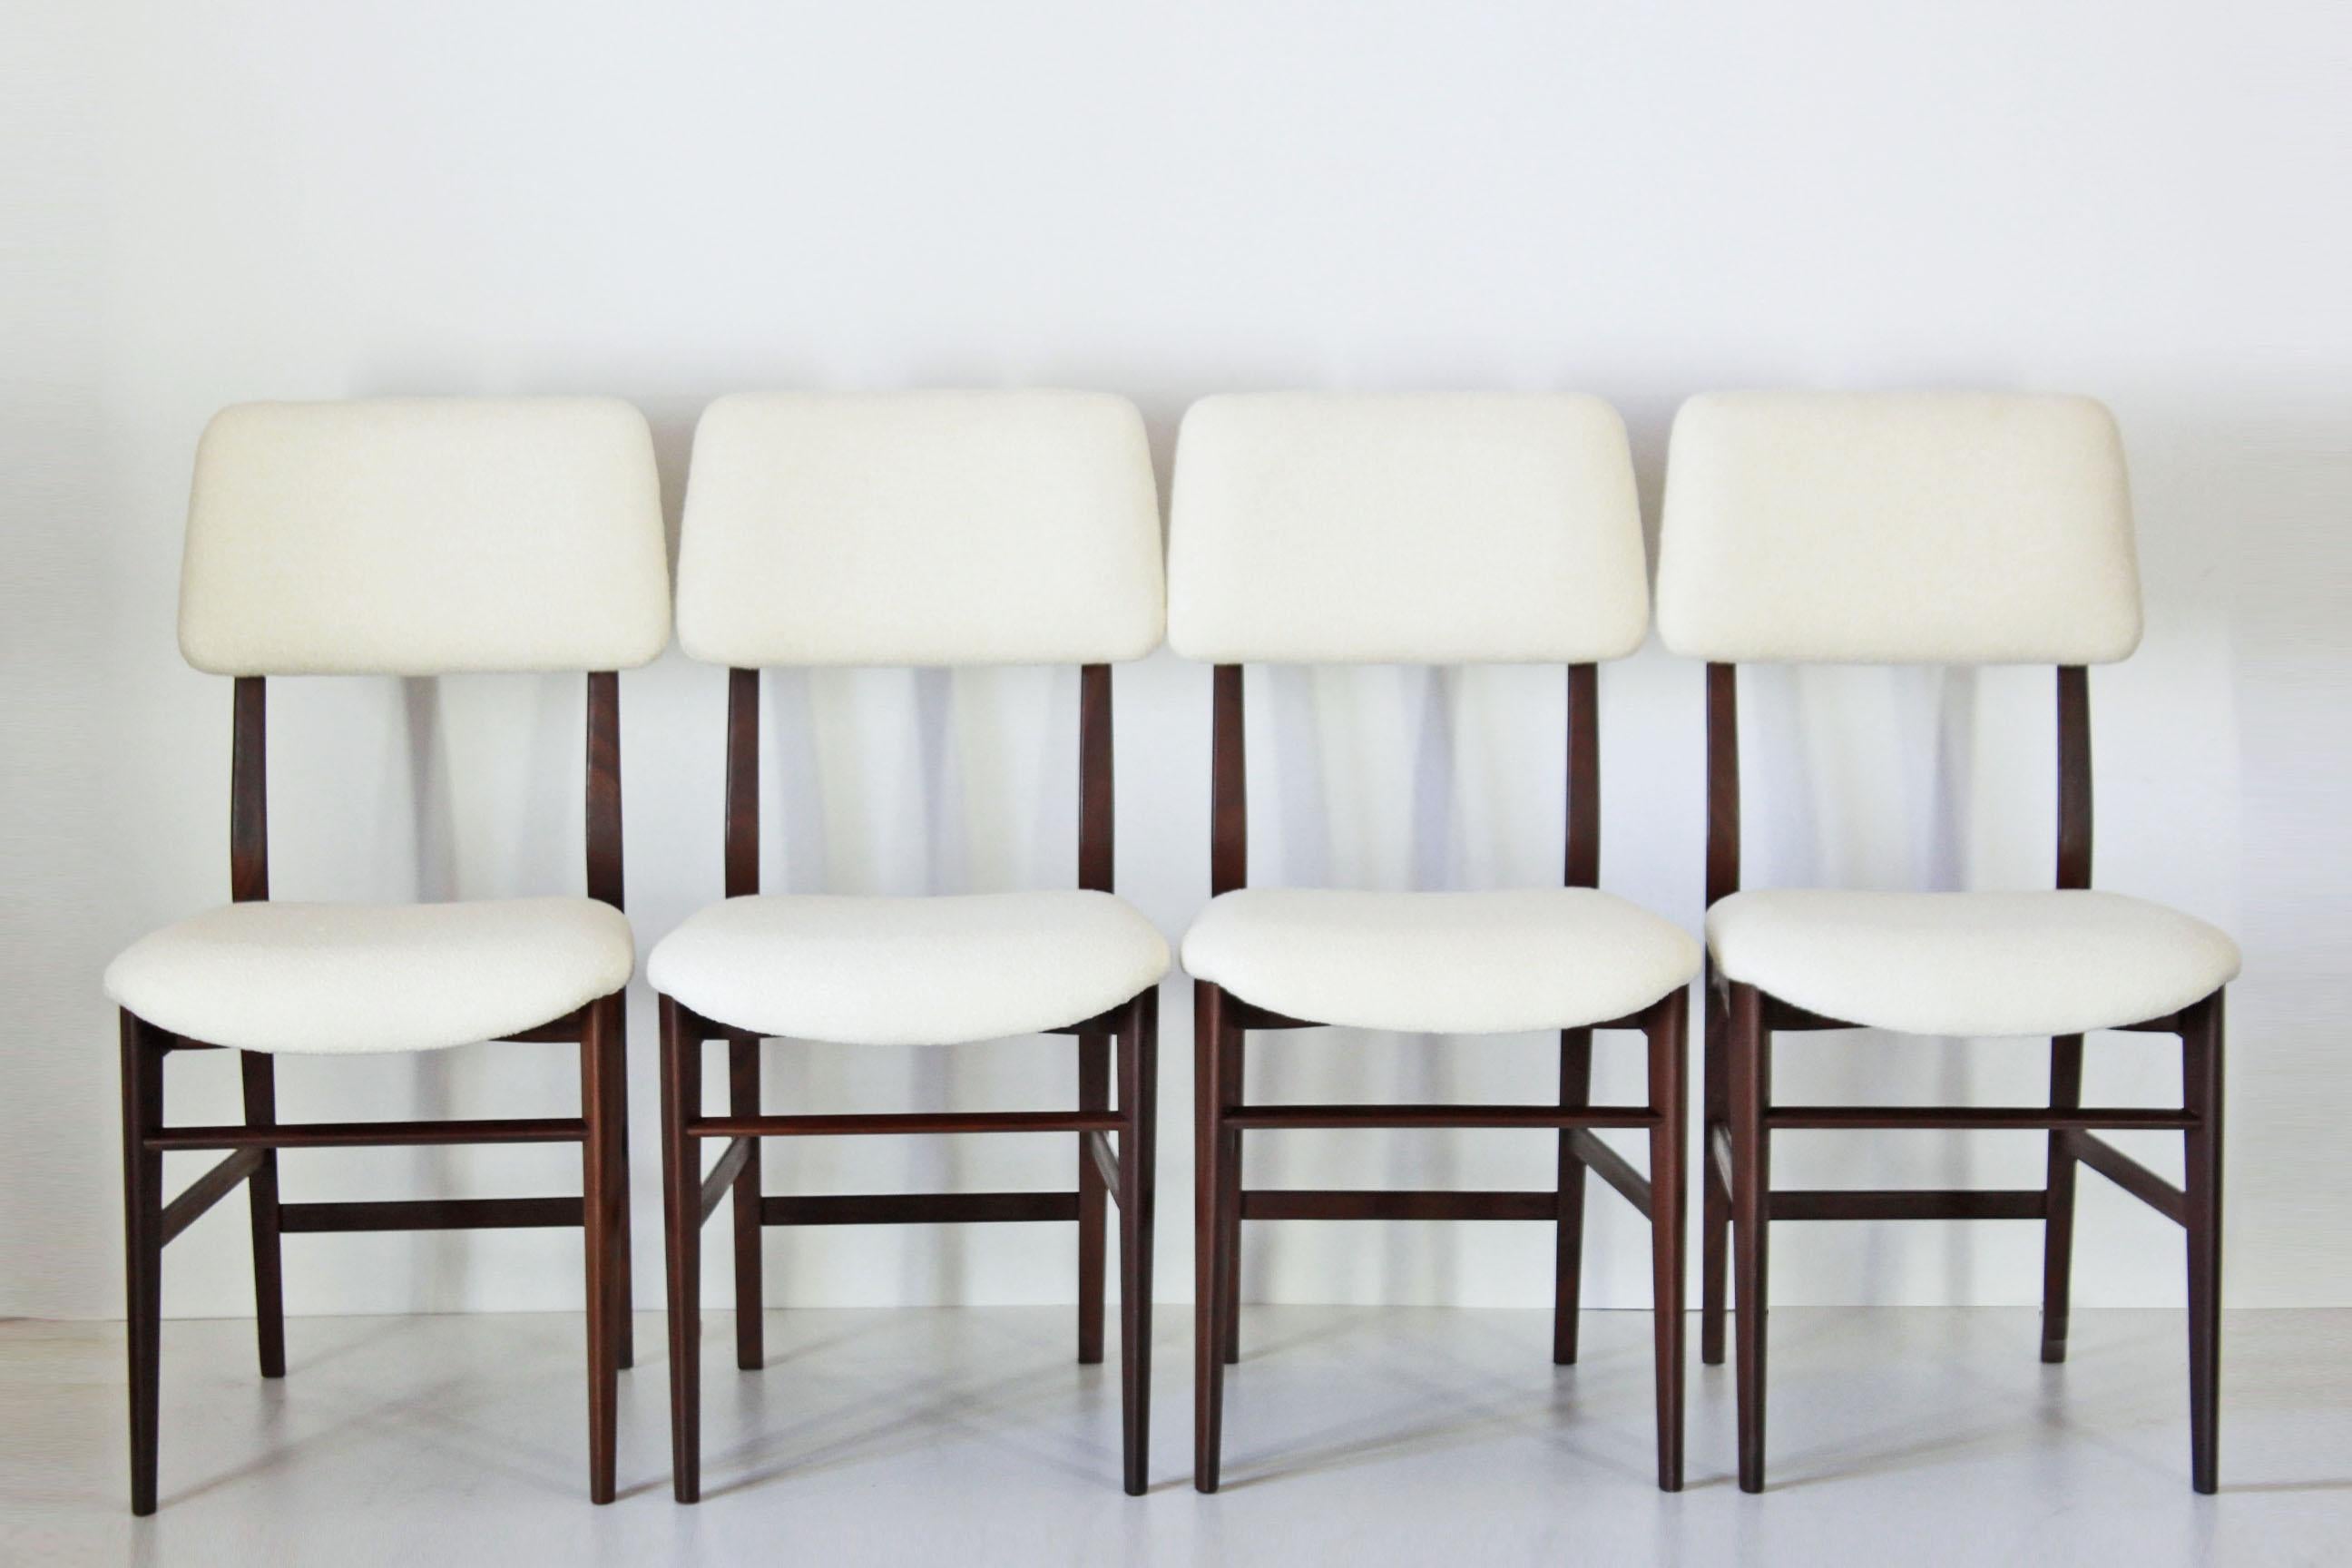 1960s vintage dining chairs by iconic Italian brand 